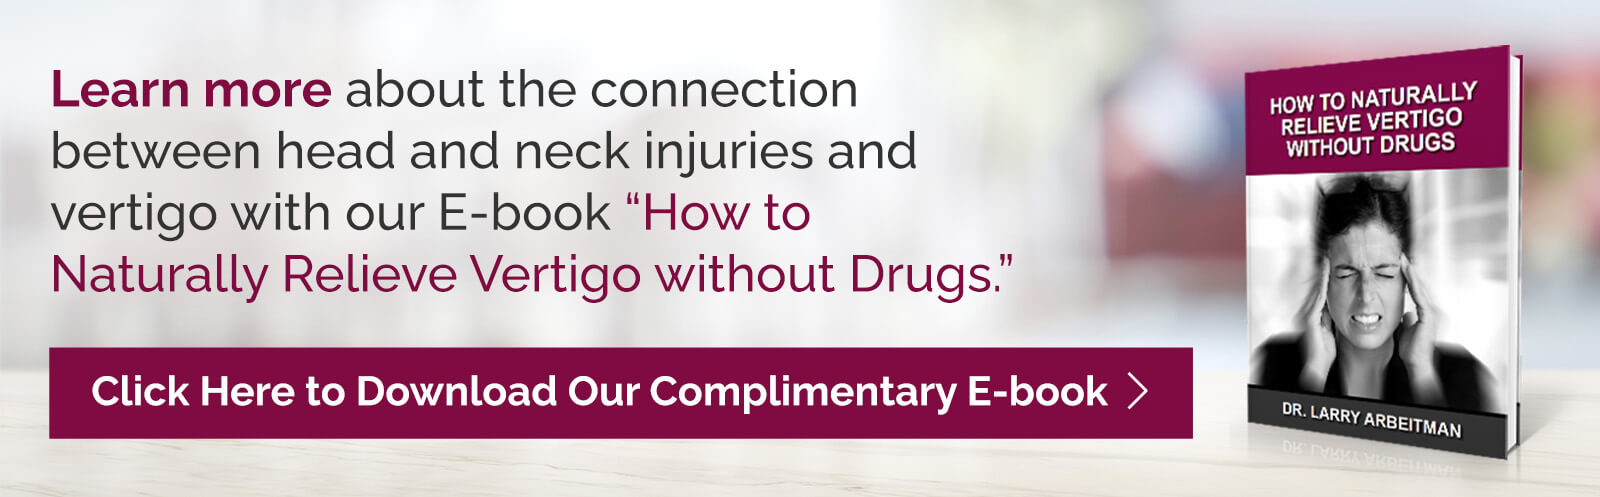 Learn more about the connection between head and neck injuries and vertigo with our E-book "How to Naturally Relieve Vertigo without Drugs"